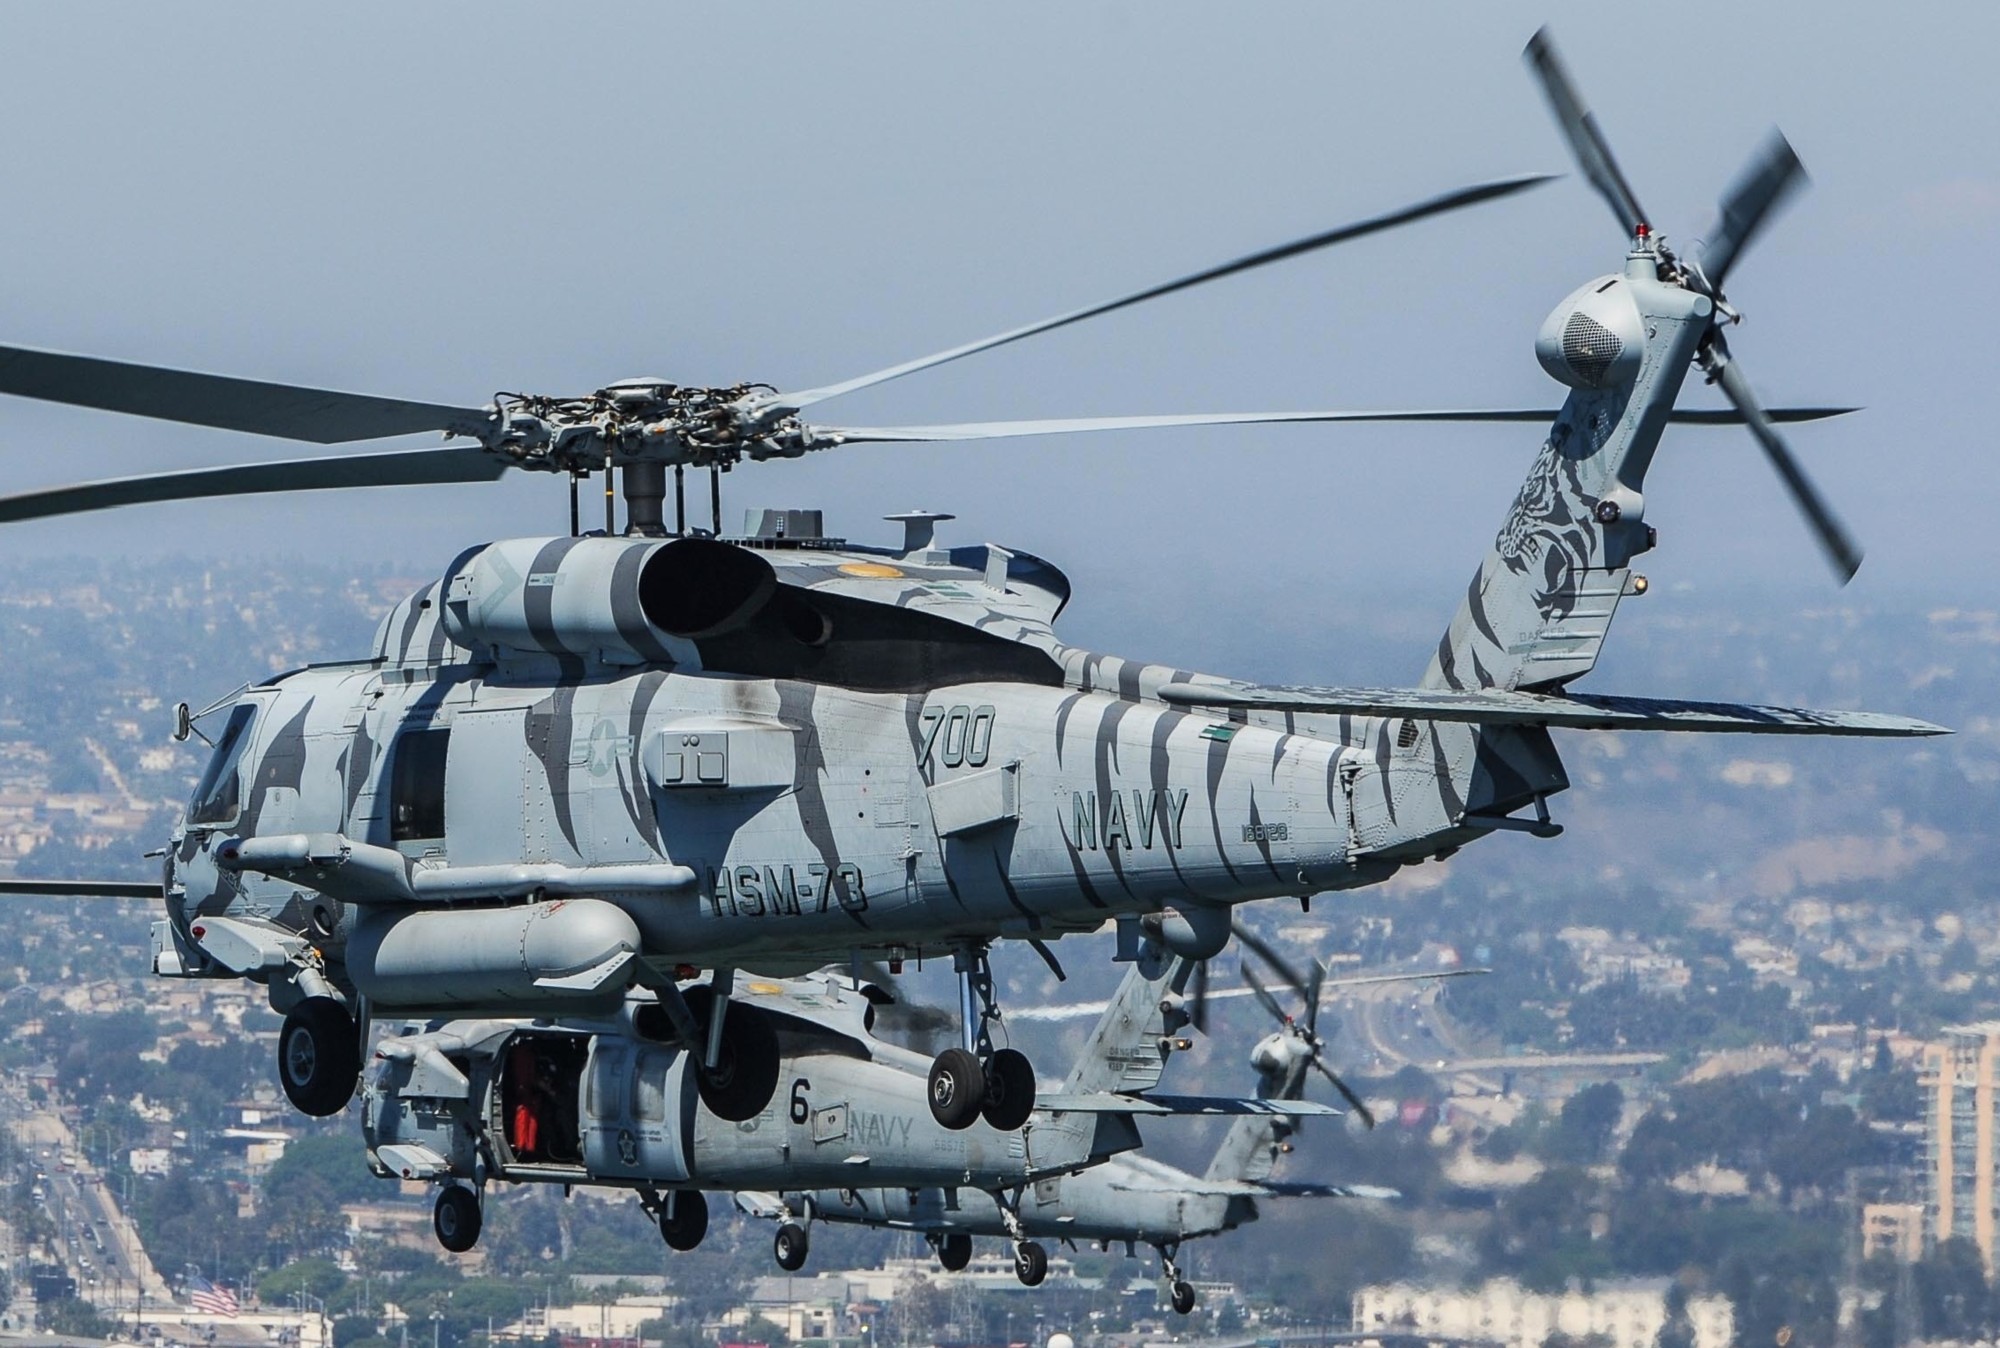 hsm-73 battlecats helicopter maritime strike squadron us navy mh-60r seahawk 2016 07